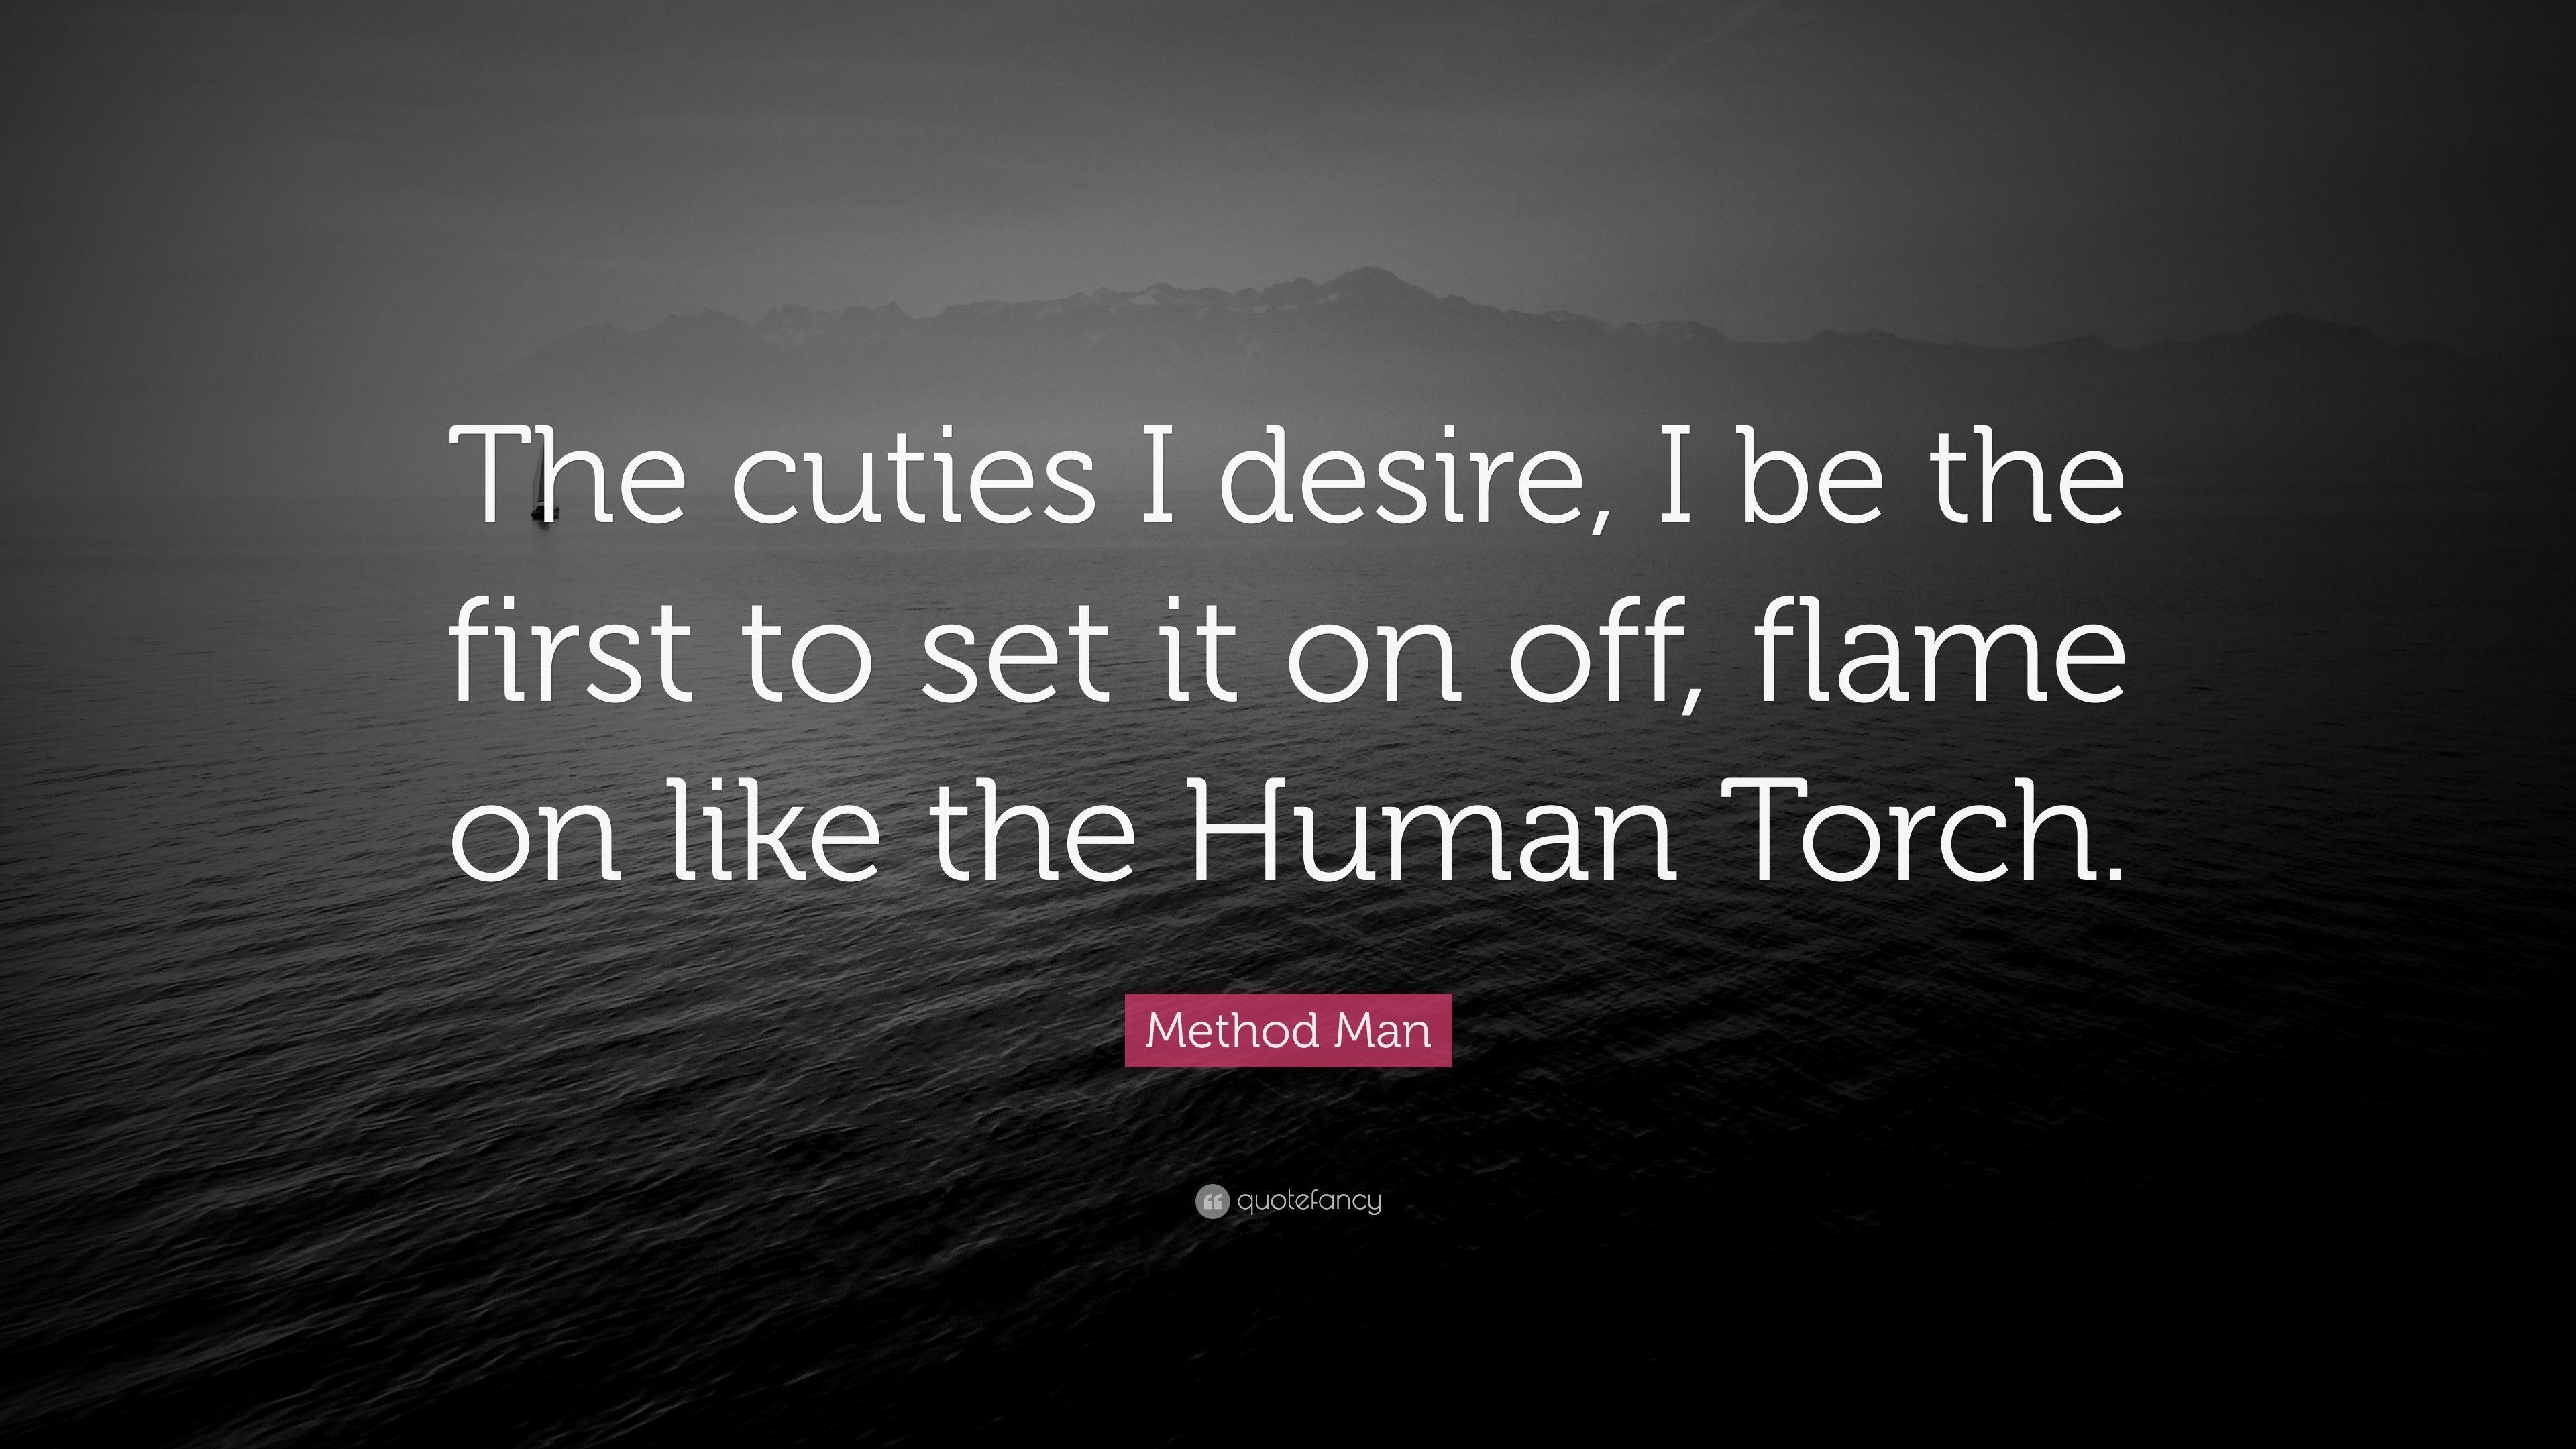 Method Man Quote: “The cuties I desire, I be the first to set it